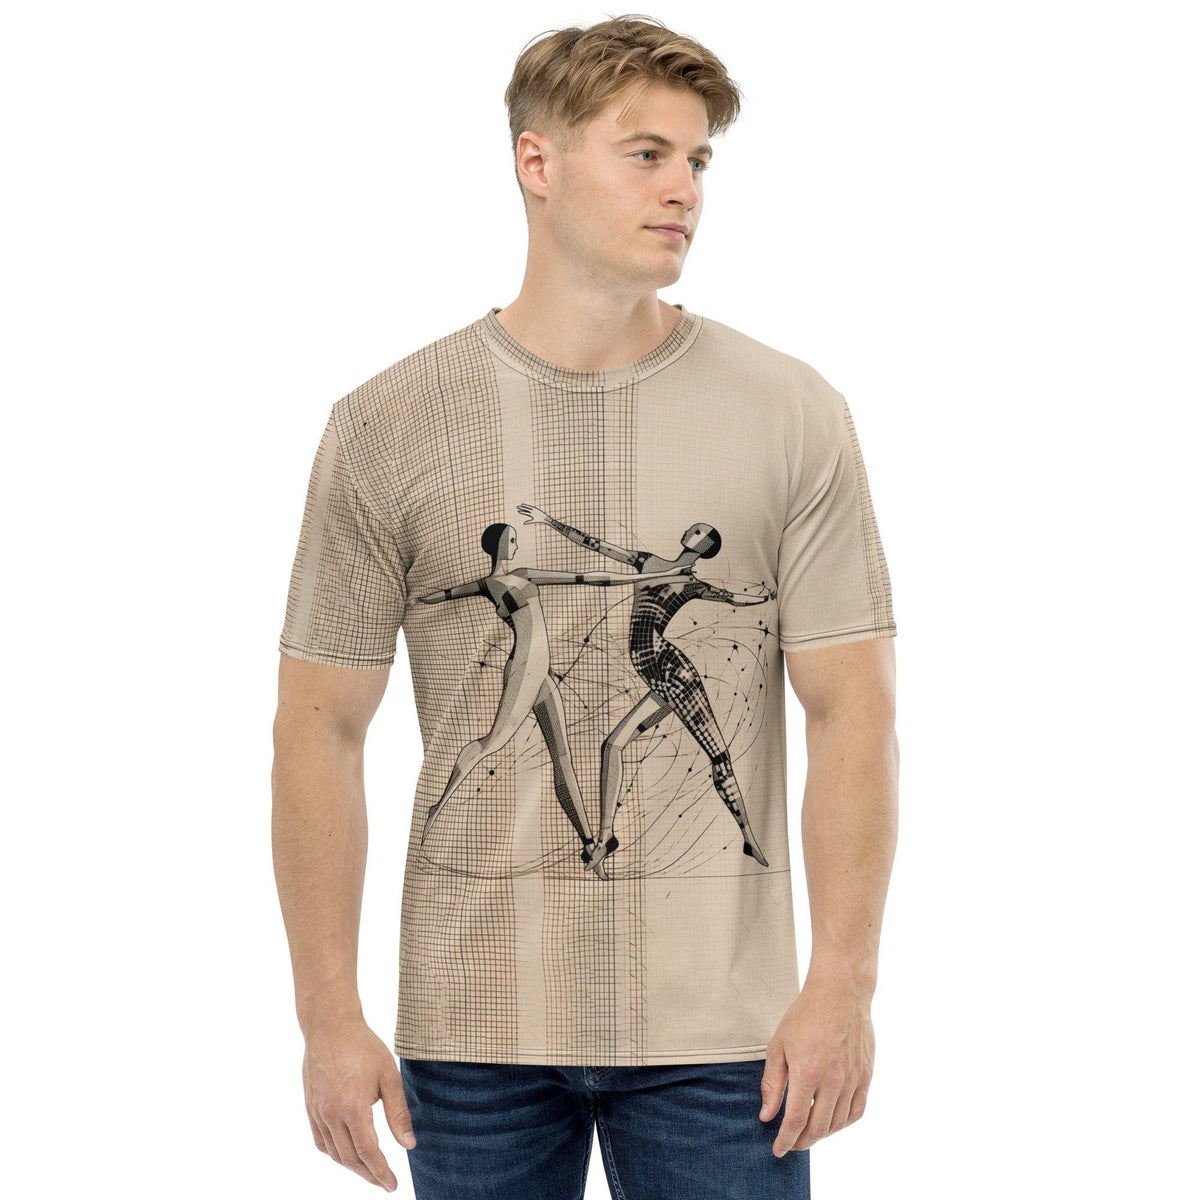 Sultry Women's Dance Style Men's T-shirt - Beyond T-shirts